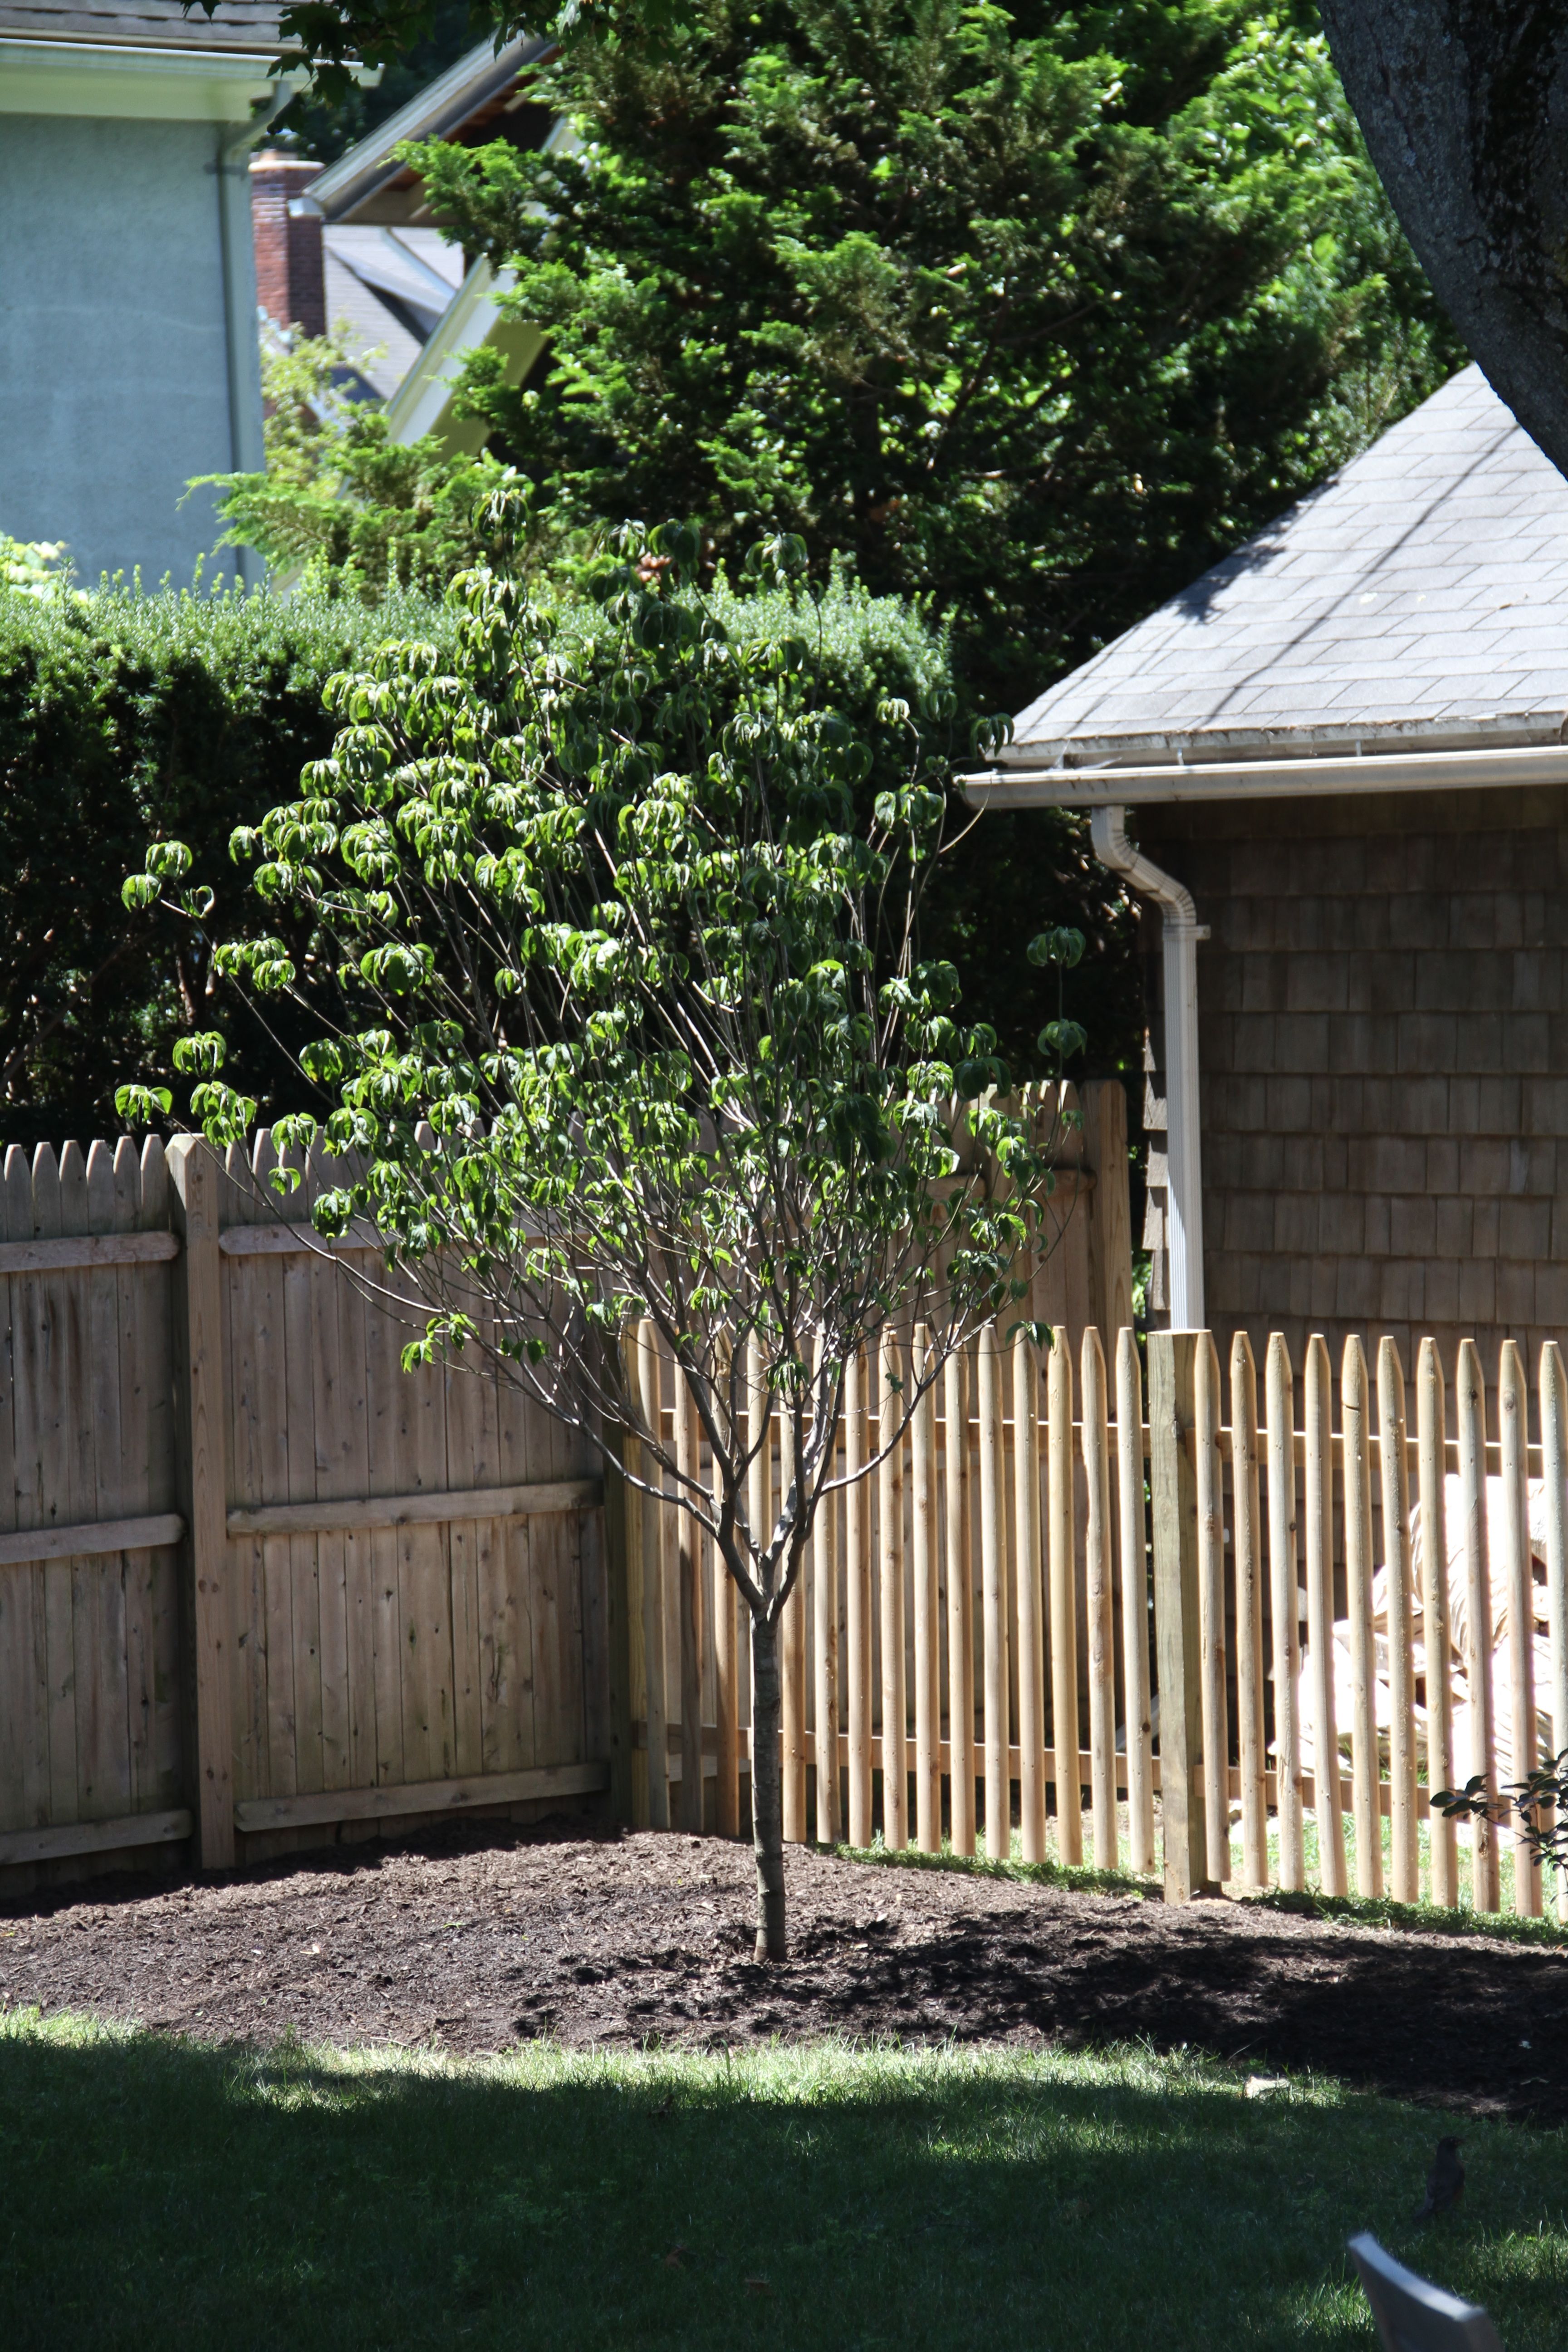 The fence really helps to set it apart from the piles of composting ingredients.